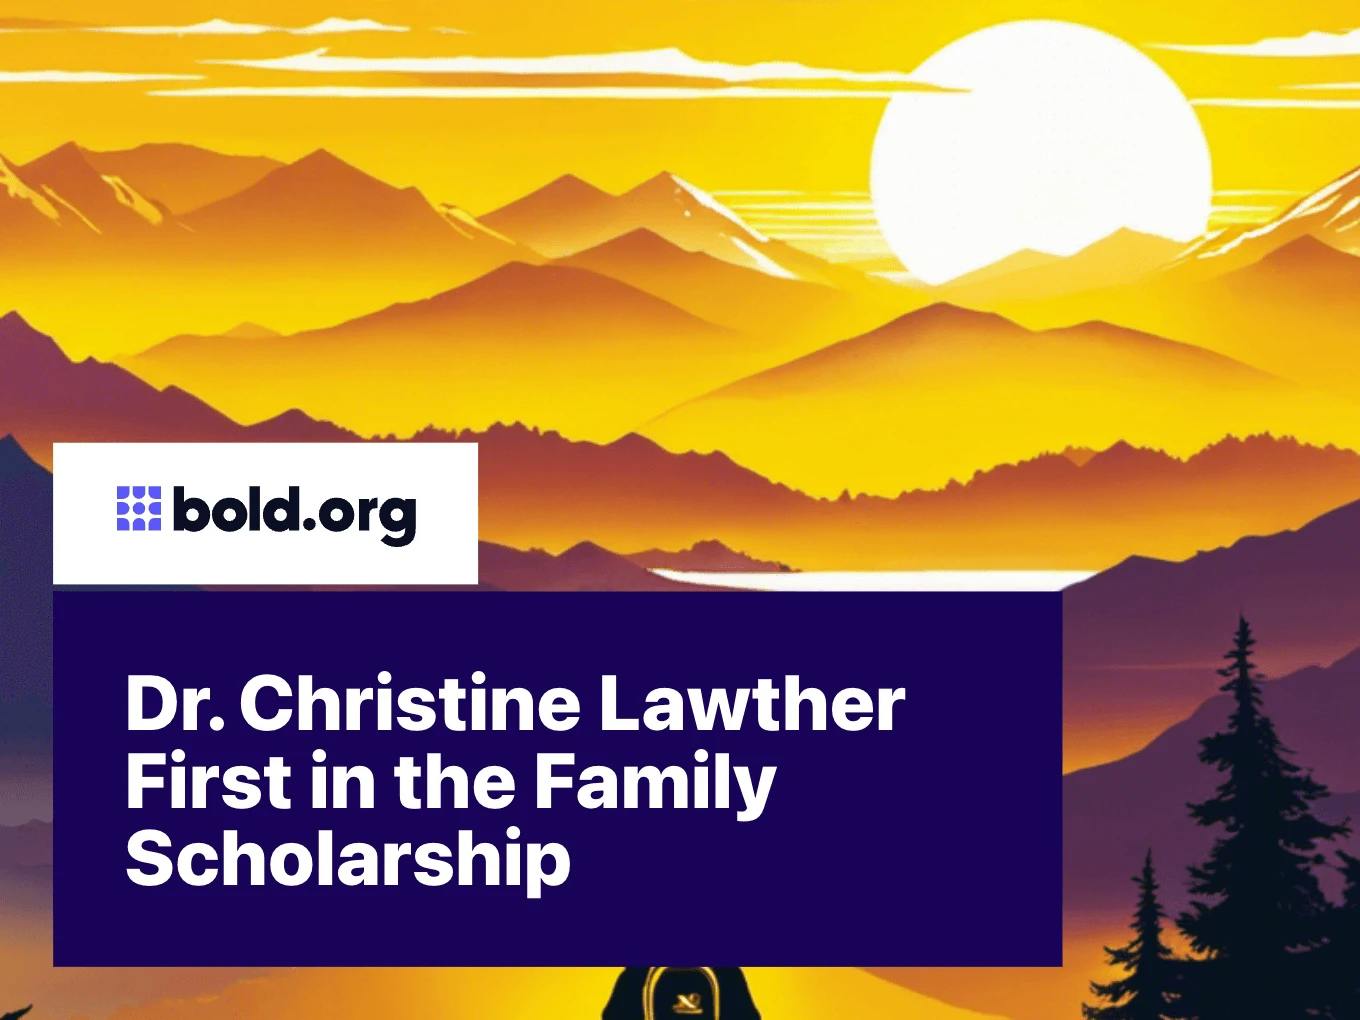 Dr. Christine Lawther First in the Family Scholarship